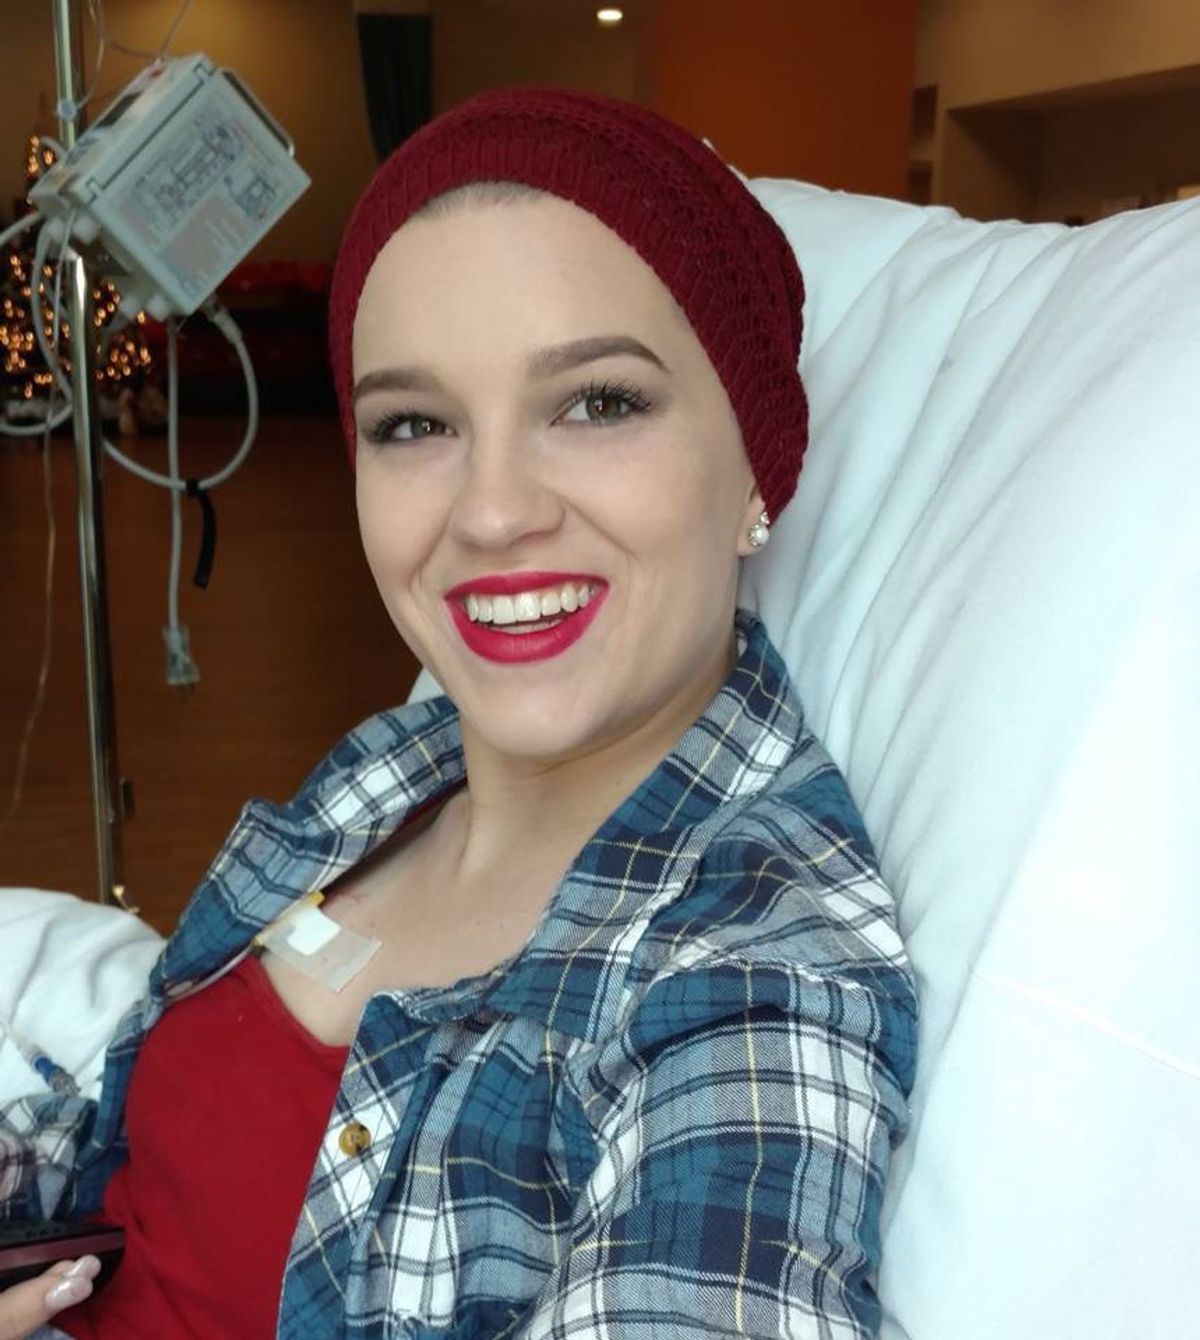 What I've Learned Since Becoming A Cancer Patient